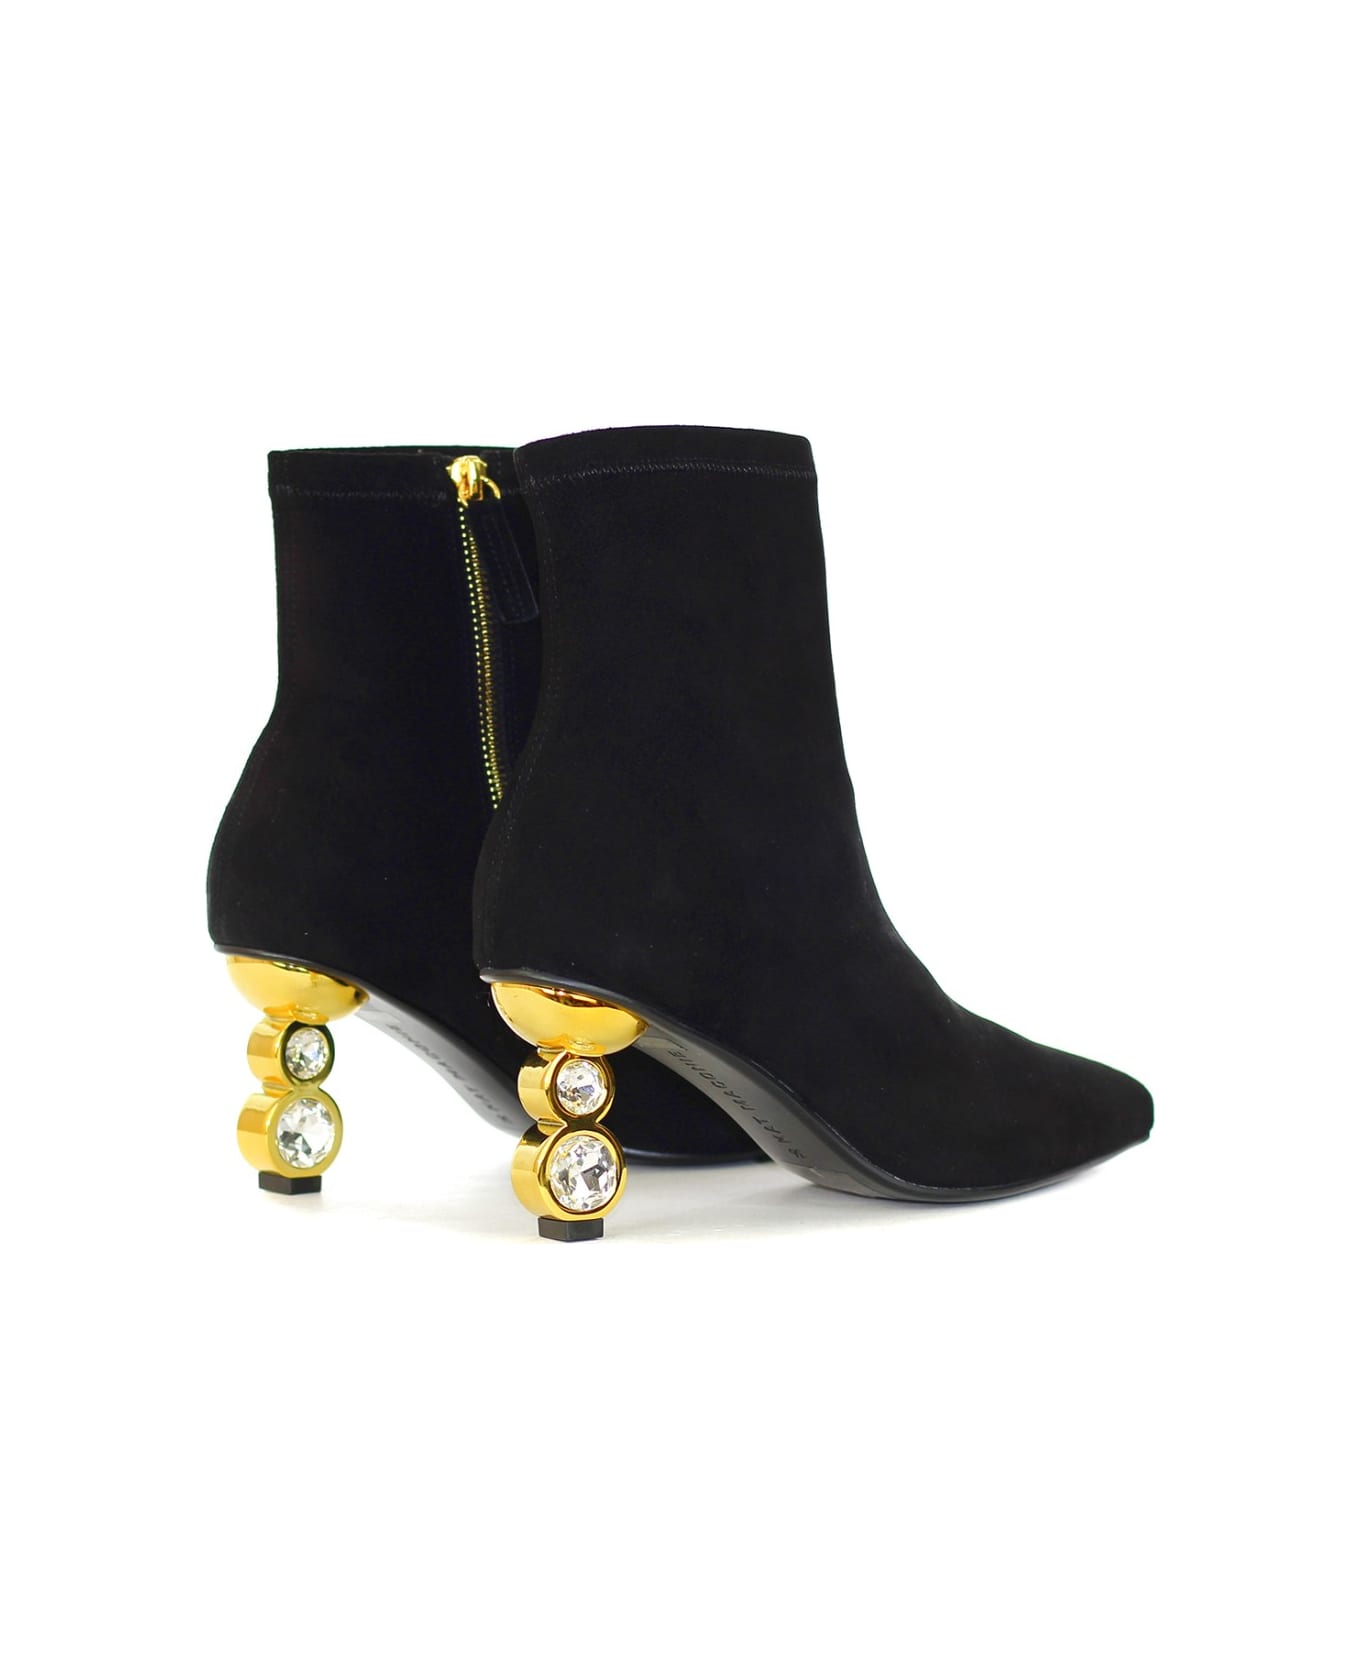 Kat Maconie Boots Ankle - Black Gold ブーツ